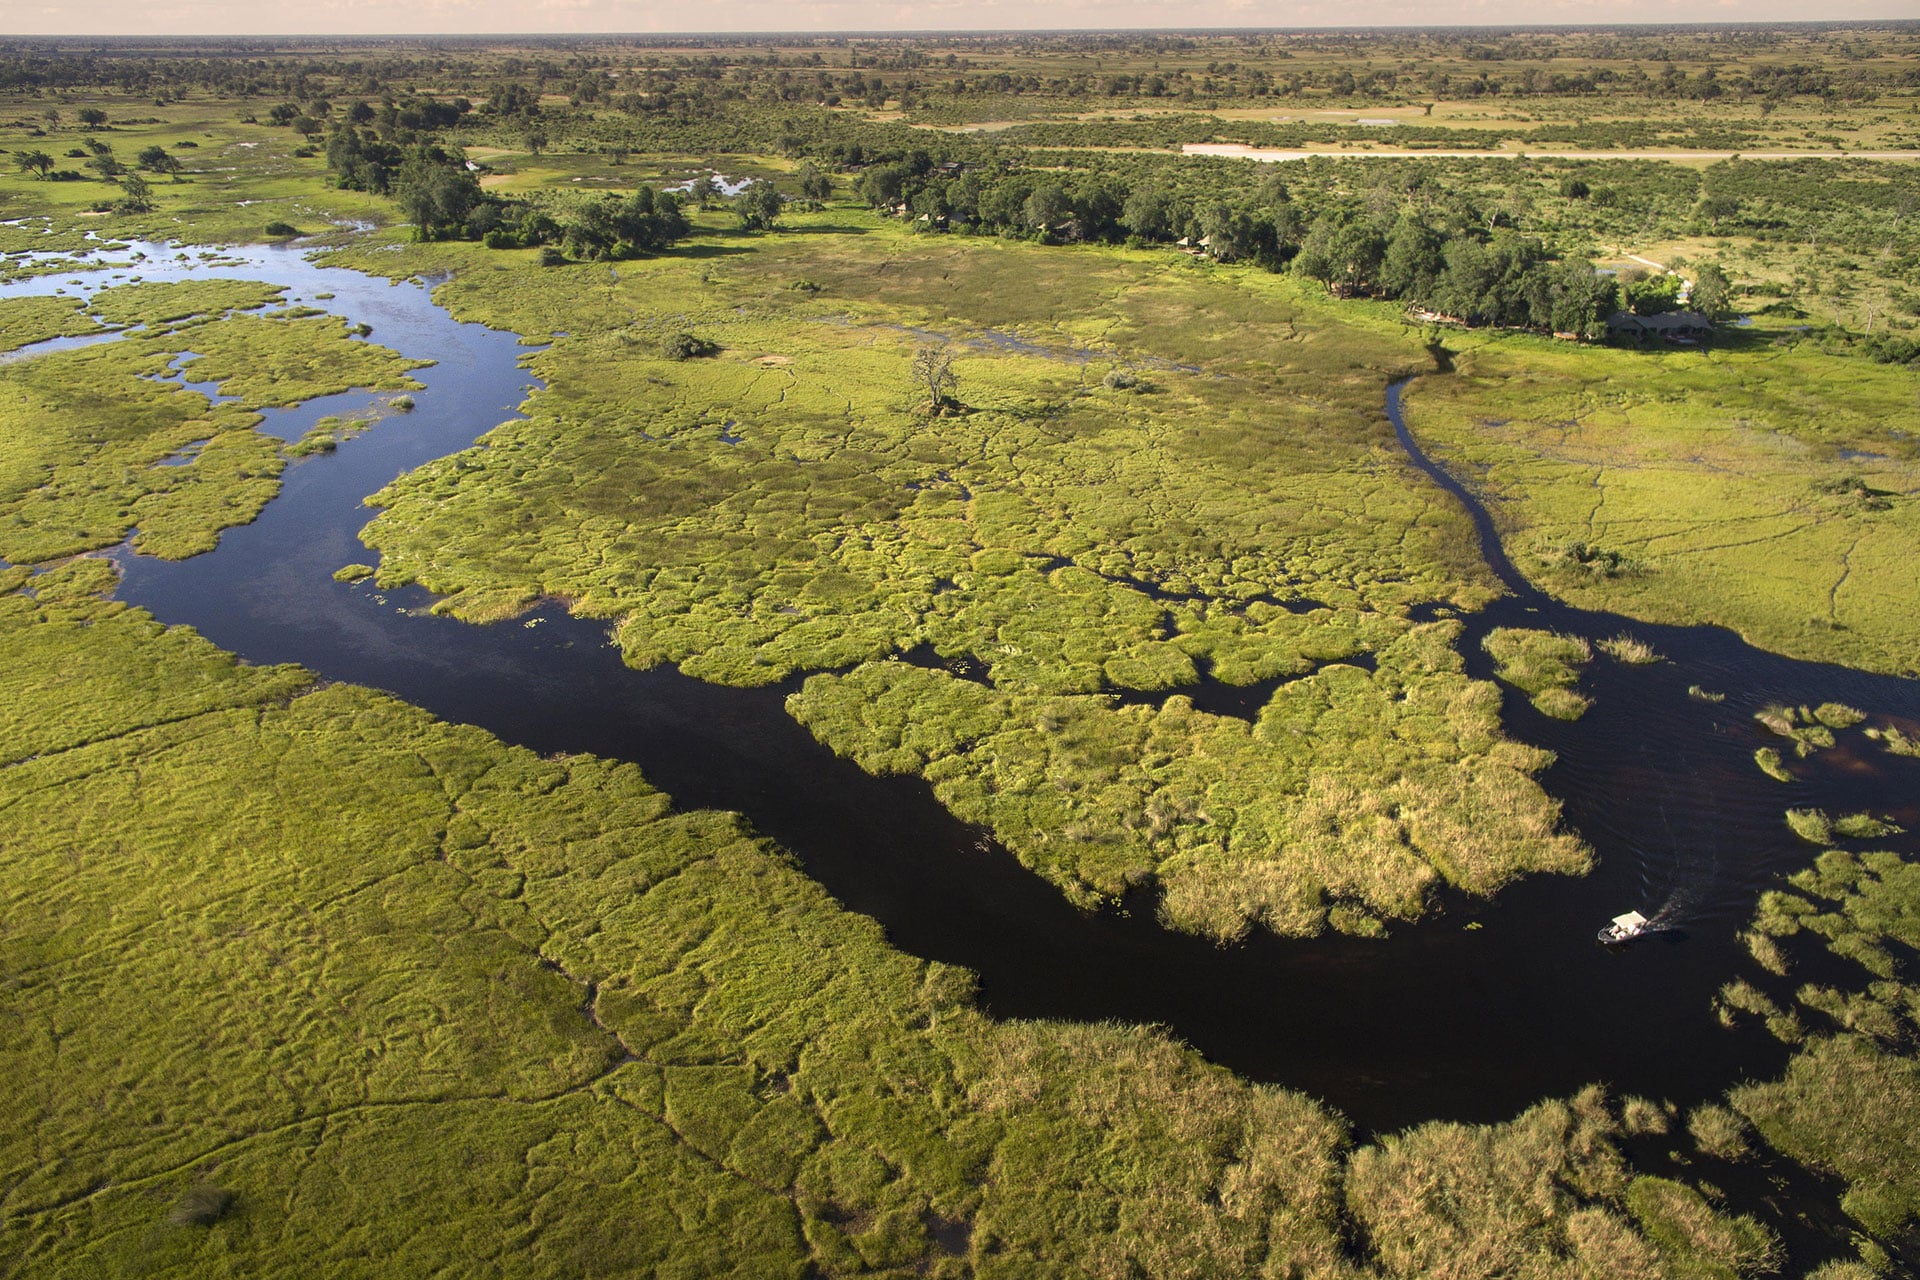 An aerial view of Duba Plains situated in the great Okavango Delta in Botswana - one of the top honeymoon destinations in Africa.